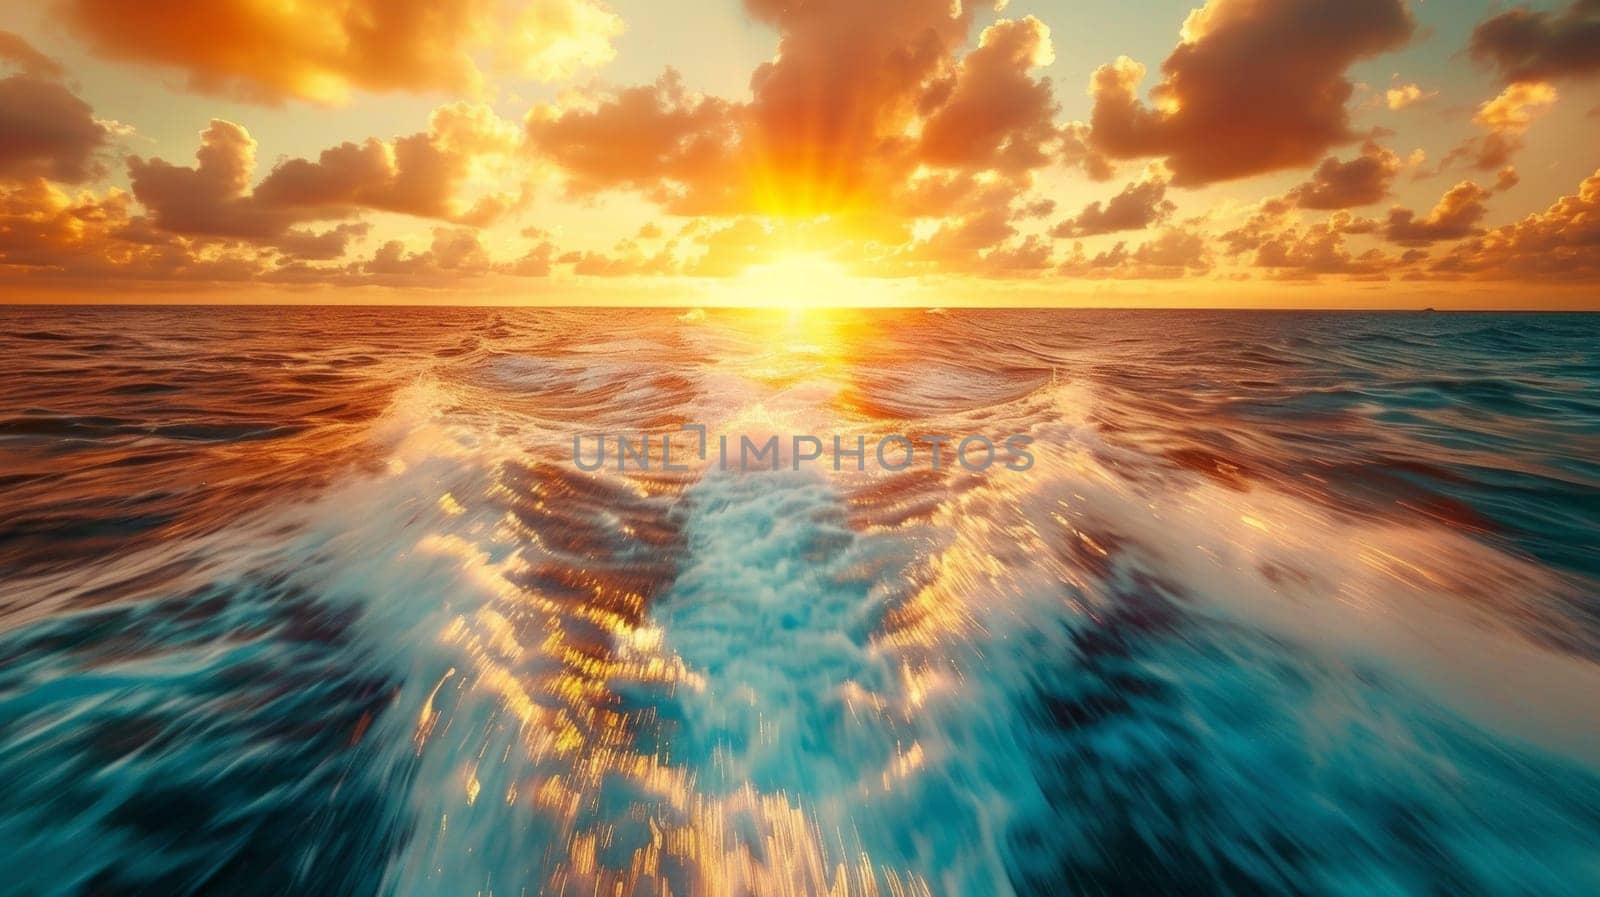 The sun is setting over the ocean as a boat moves through it, AI by starush